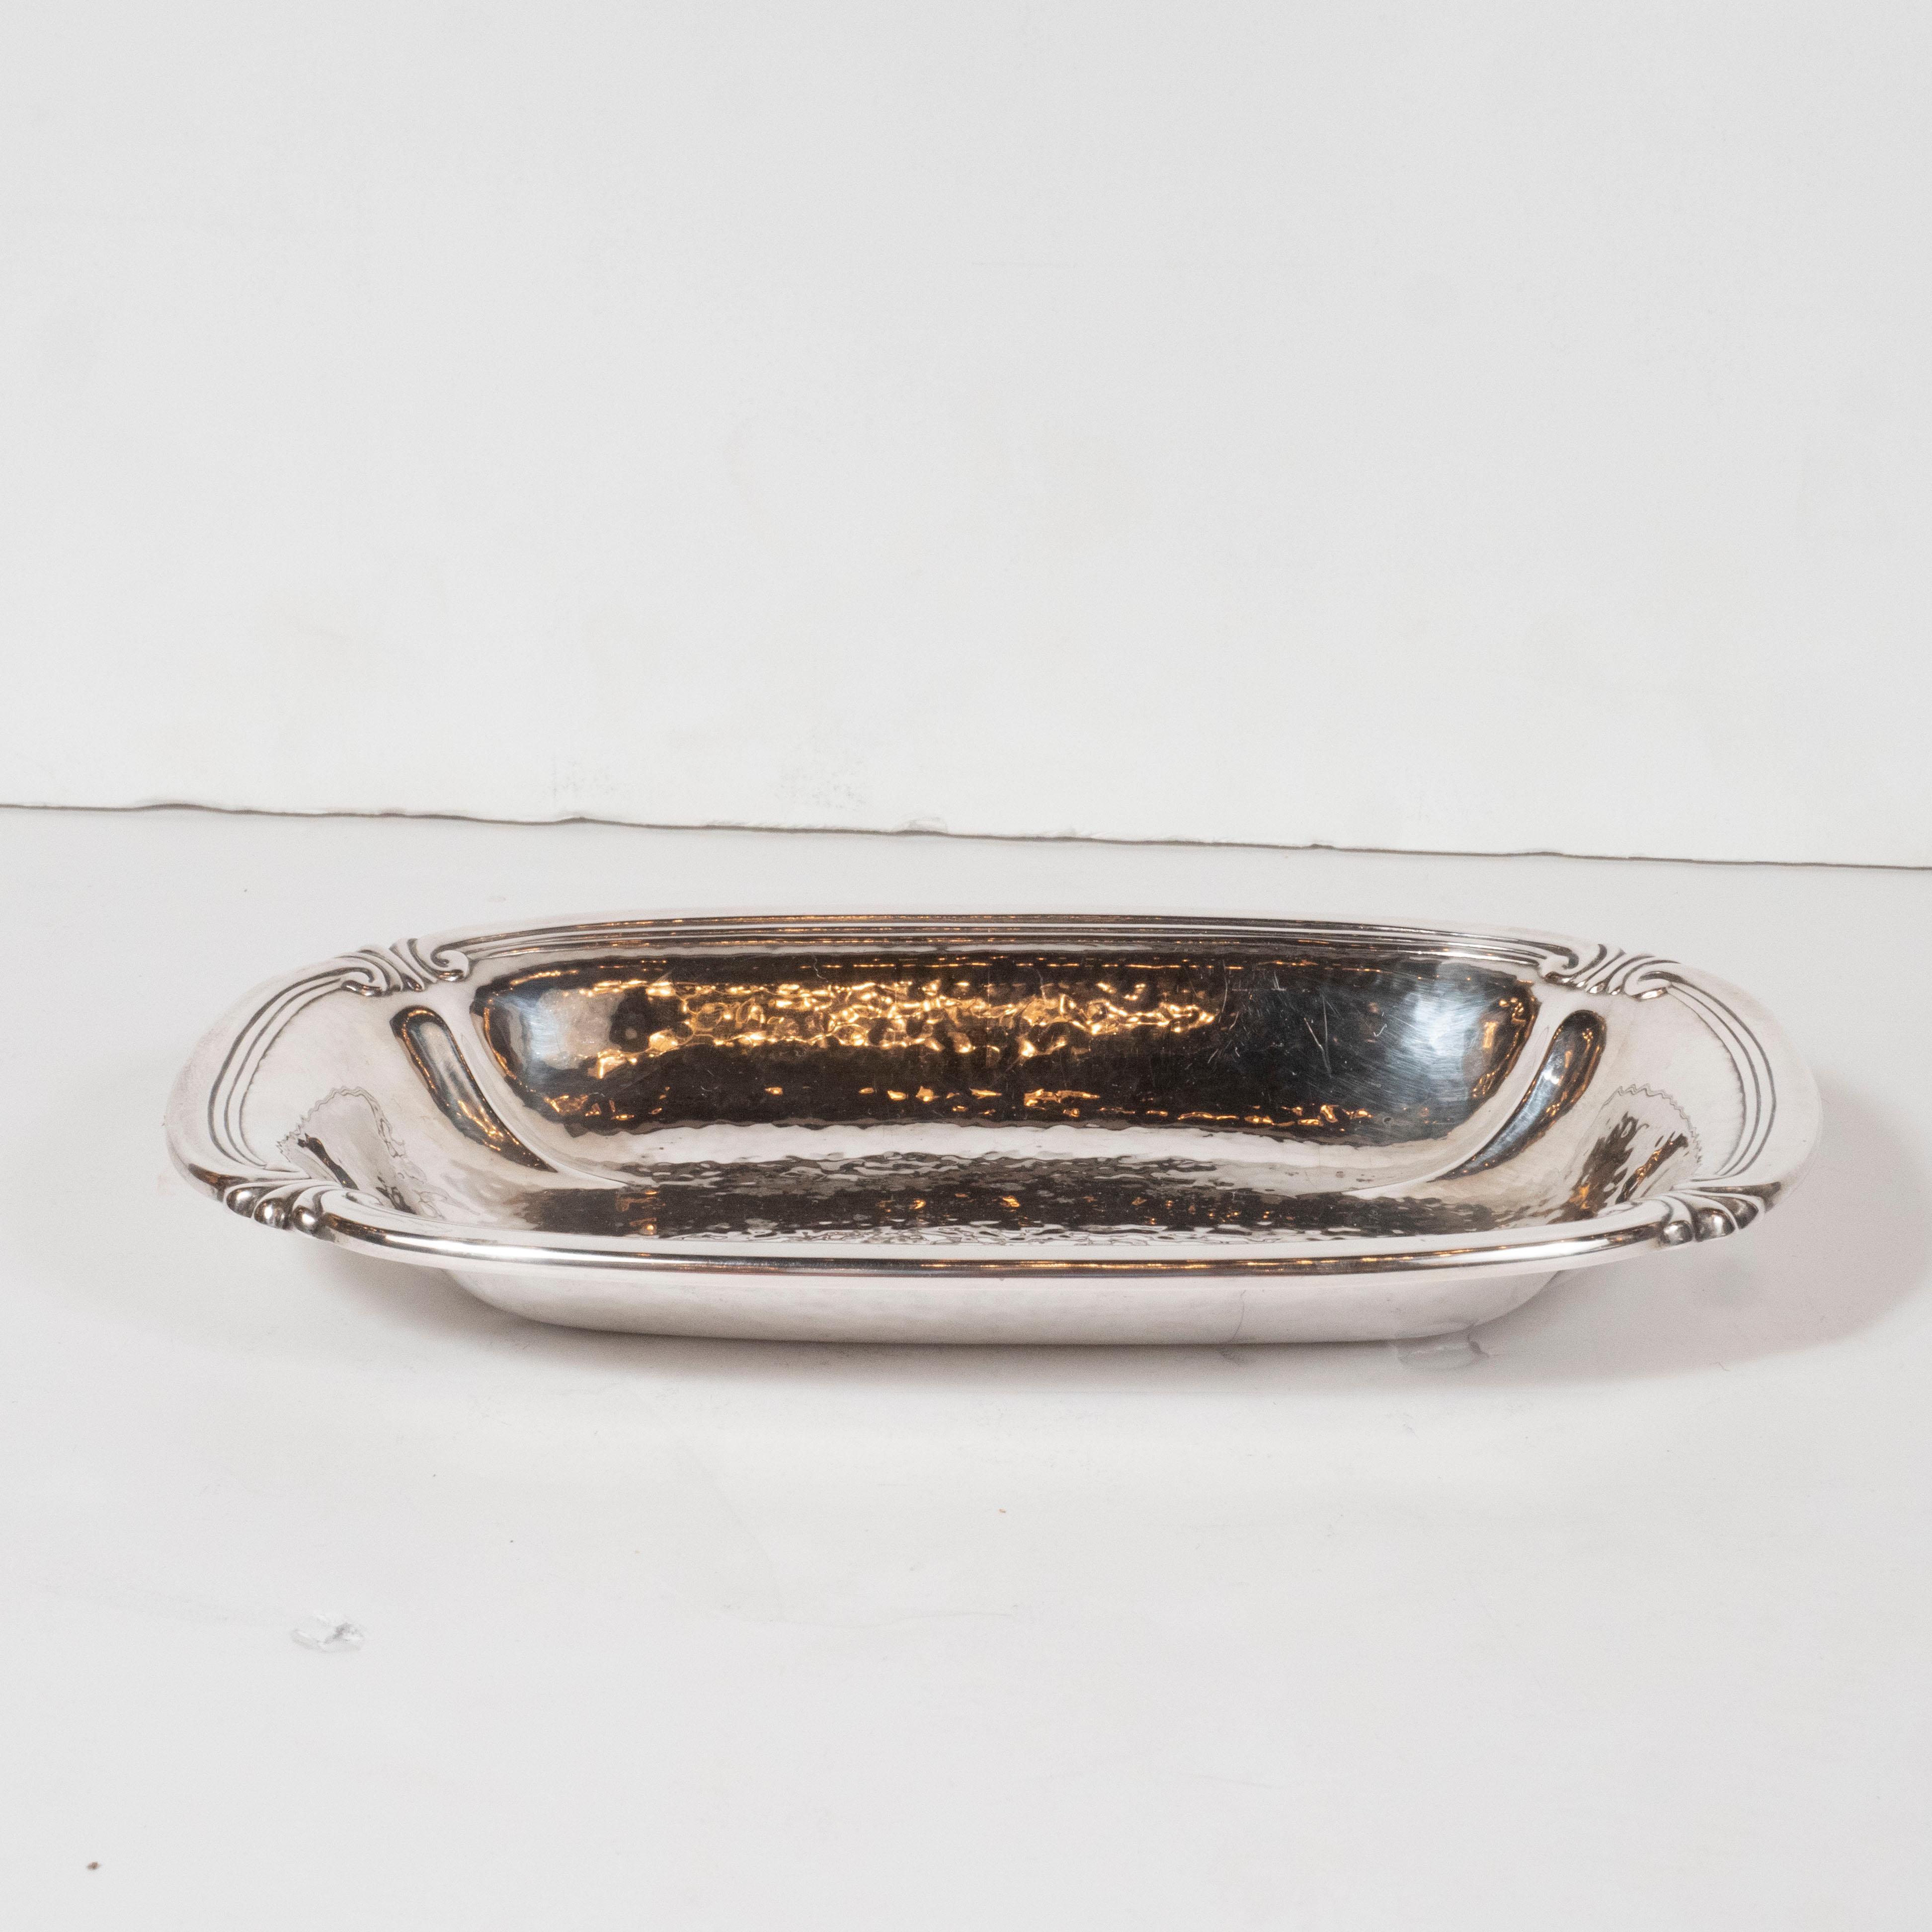 This elegant Art Deco tray was realized by the esteemed International Silver Company in the United States circa 1930. It features an oval form with raised sides adorned with channel detailing and neoclassical stylized motifs at each corner. With